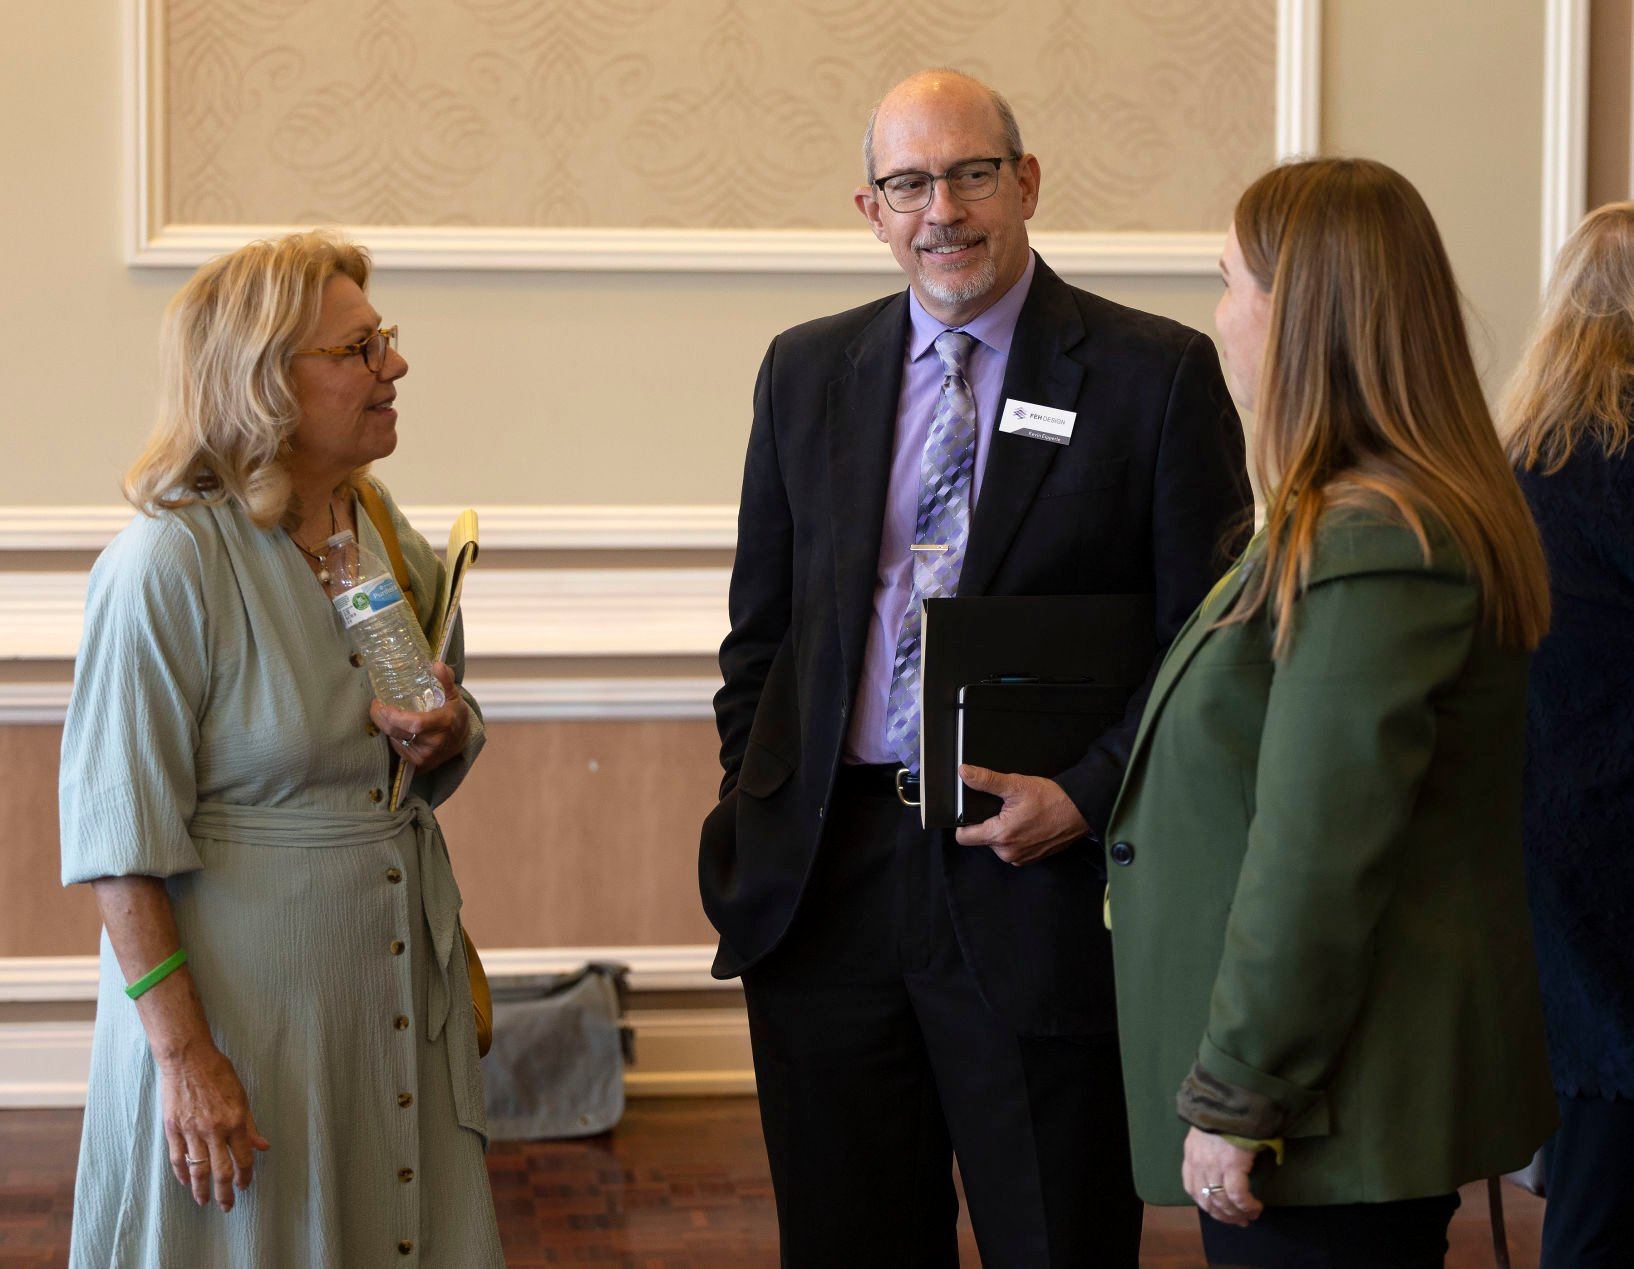 Iowa Sen. Pam Jochum, D-Dubuque, (left) speaks with FEH Design president Kevin Eipperle and Iowa Rep. Lindsay James, D-Dubuque before a panel discussion at the Dubuque Area Chamber of Commerce Legislative Conference at the Hotel Julien Dubuque on Wednesday, Sept. 7, 2022.    PHOTO CREDIT: Stephen Gassman